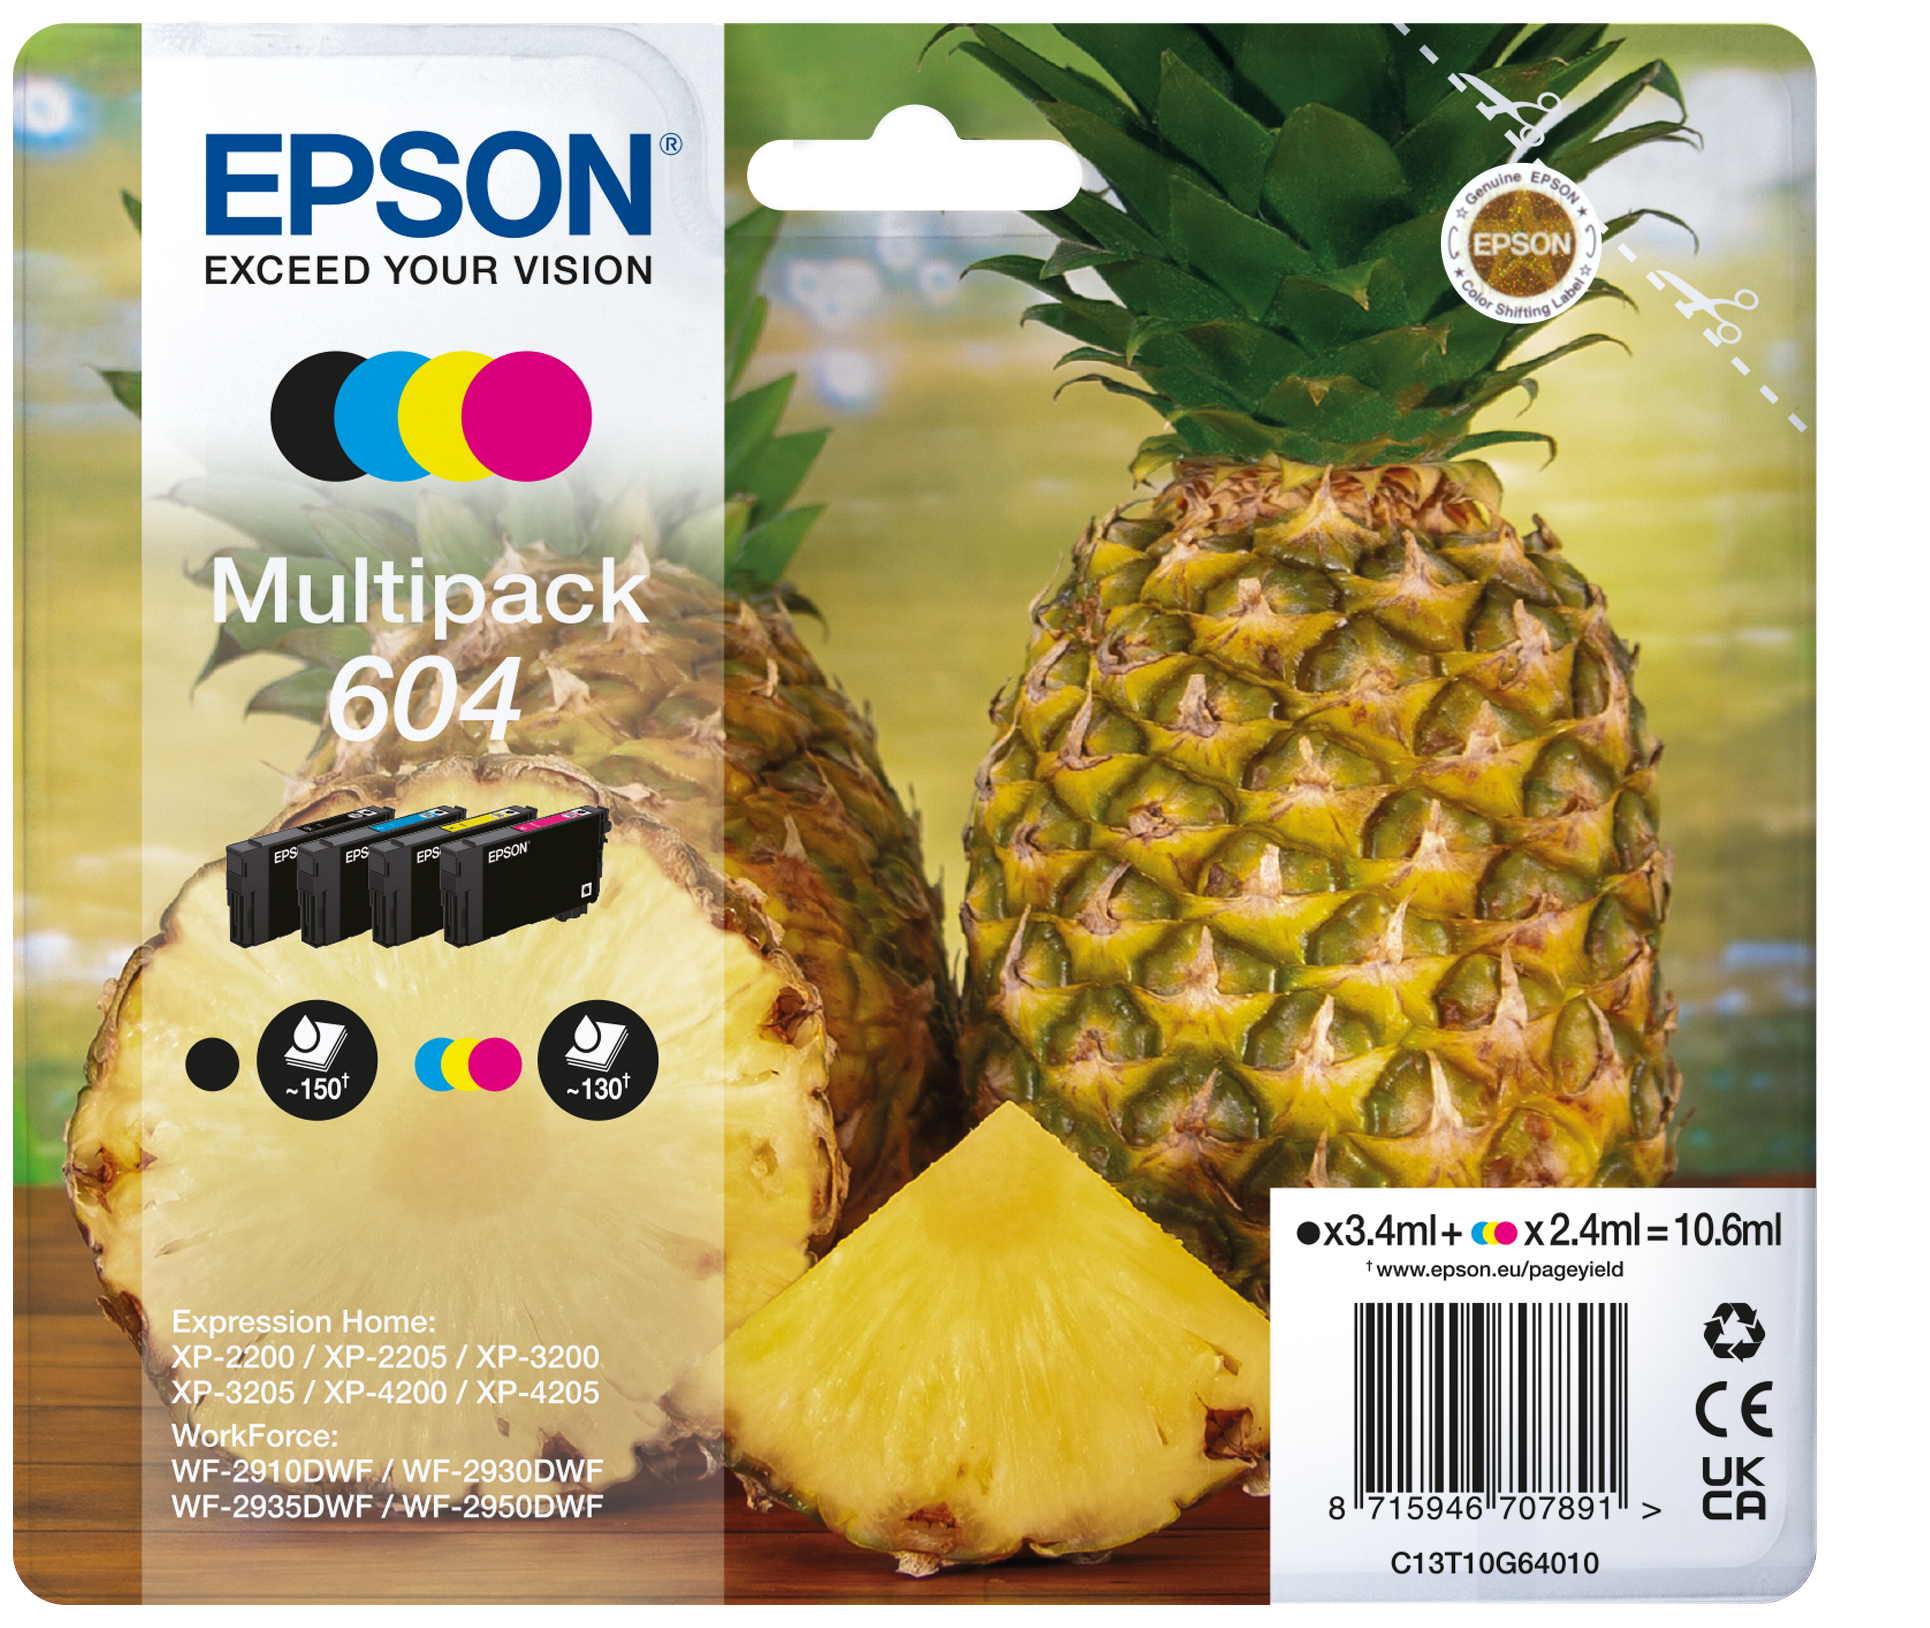 Epson Inkjet Products | Printers Europe XP-3205 | | Consumer | Printers Home | Expression